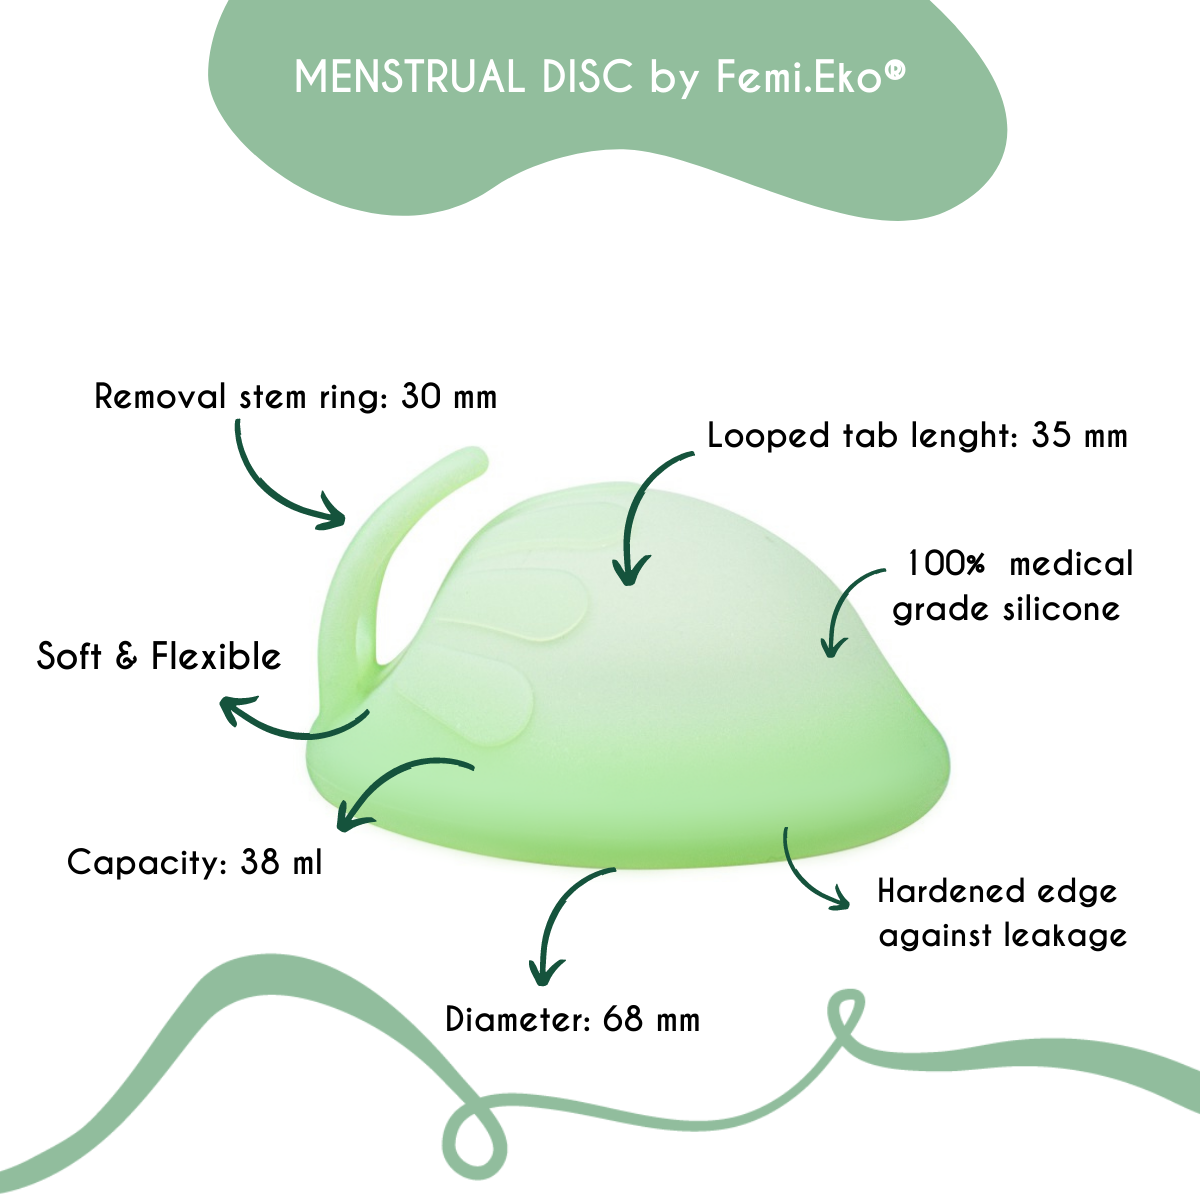 What is the menstrual disc?